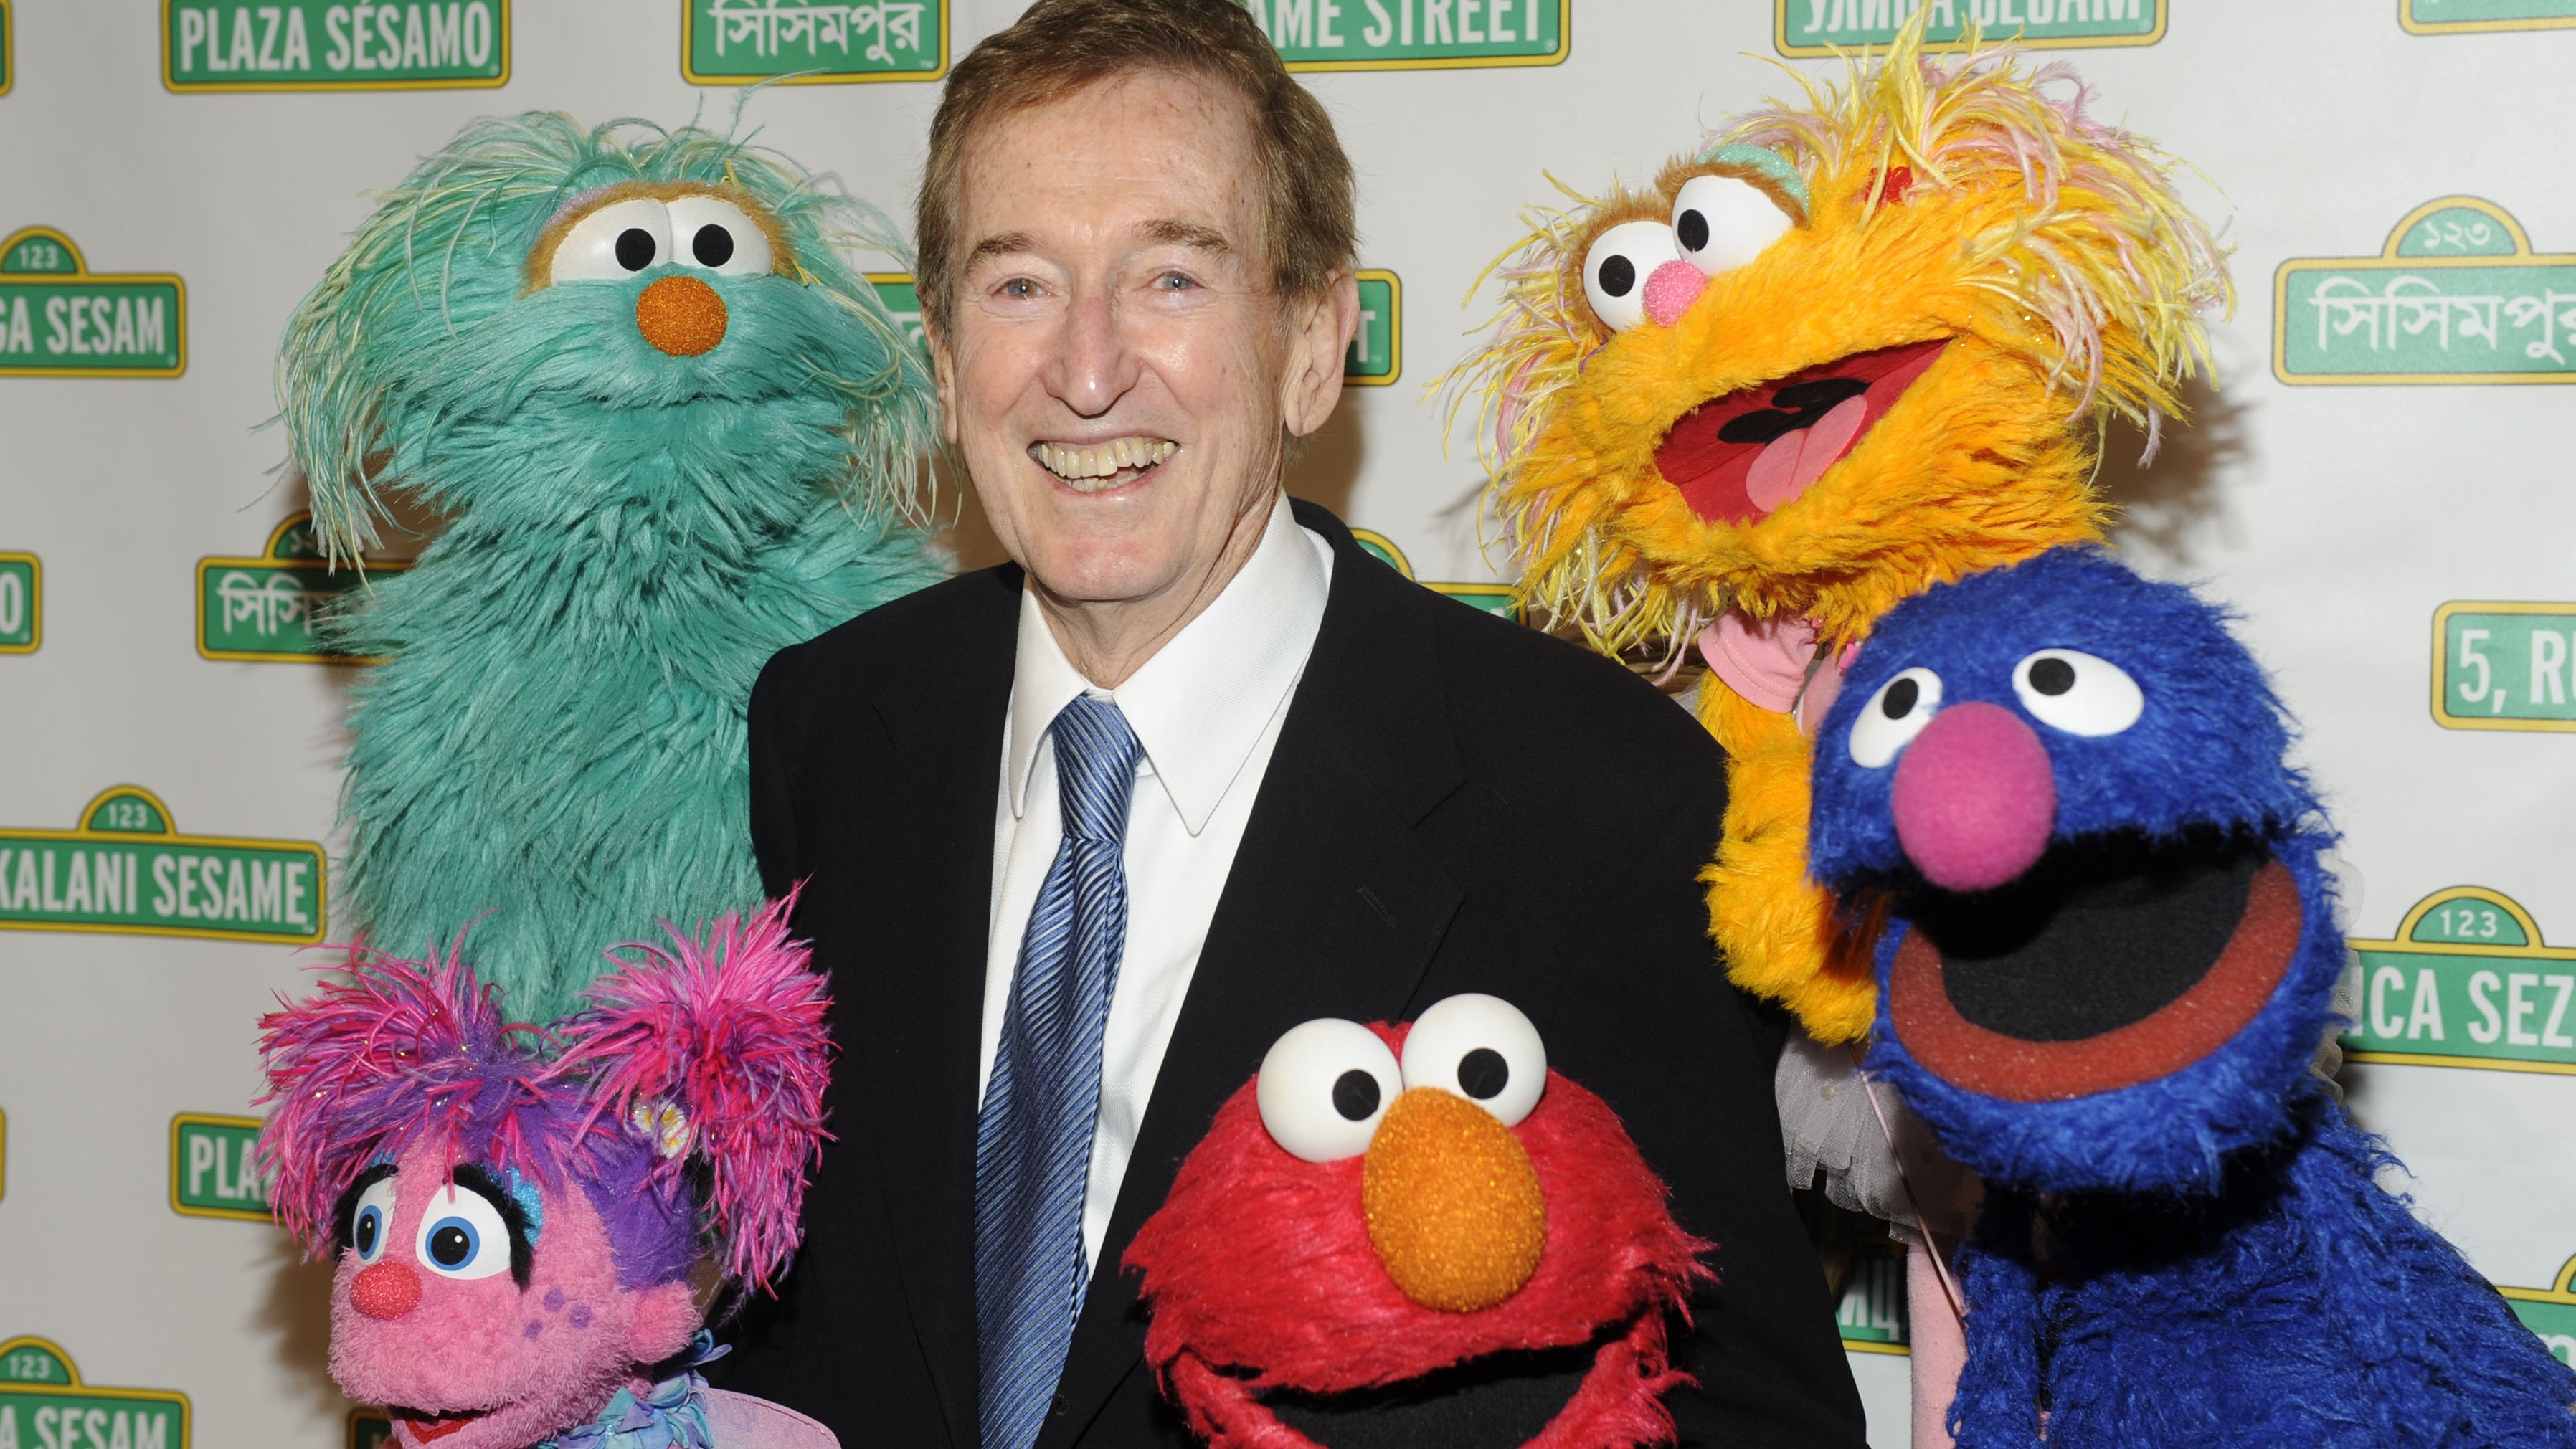 <a href="https://www.cnn.com/2022/12/04/entertainment/bob-mcgrath-obit/index.html" target="_blank">Bob McGrath,</a> an original cast member of the beloved children's program "Sesame Street," died on December 4, according to statements from his family and Sesame Workshop. He was 90.